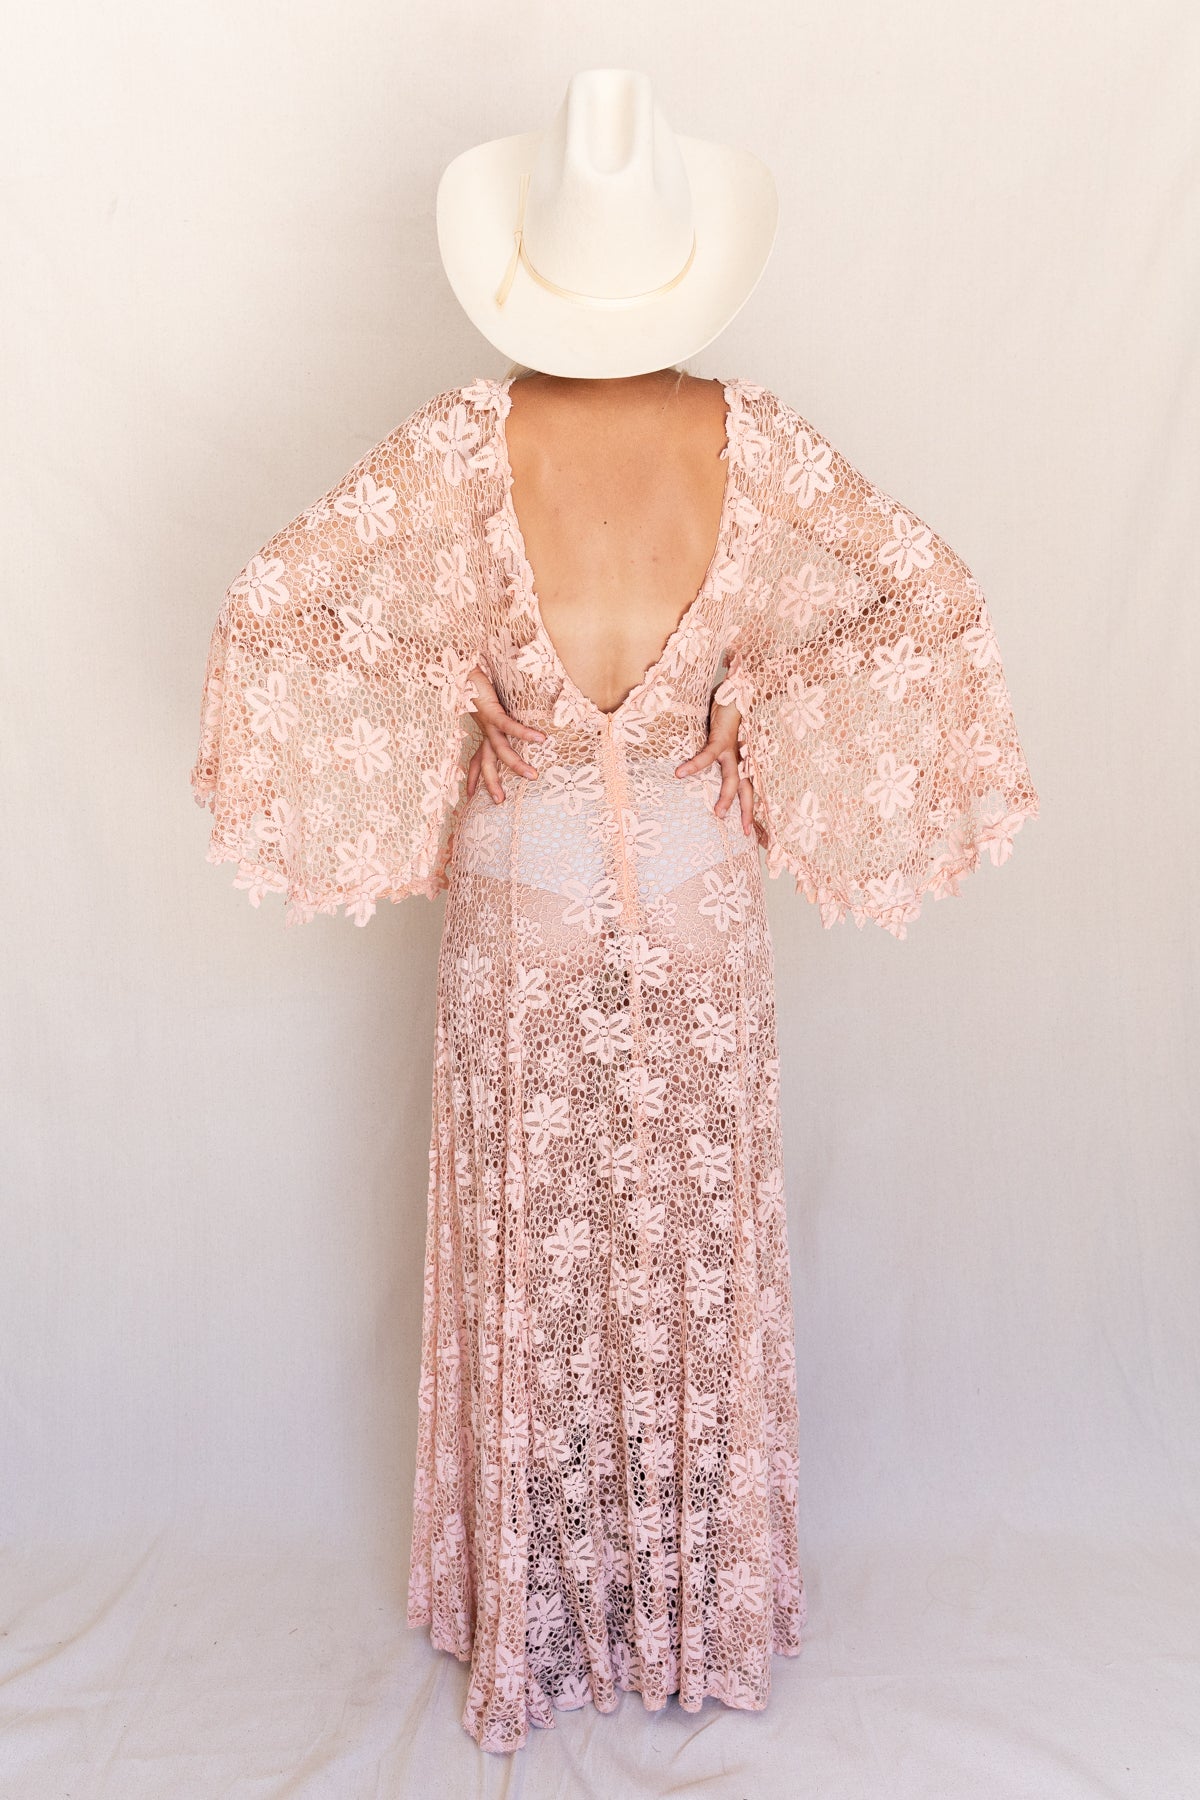 VINTAGE 1960's Low Back Angel Sleeve Pink Flower Lace Maxi Dress S